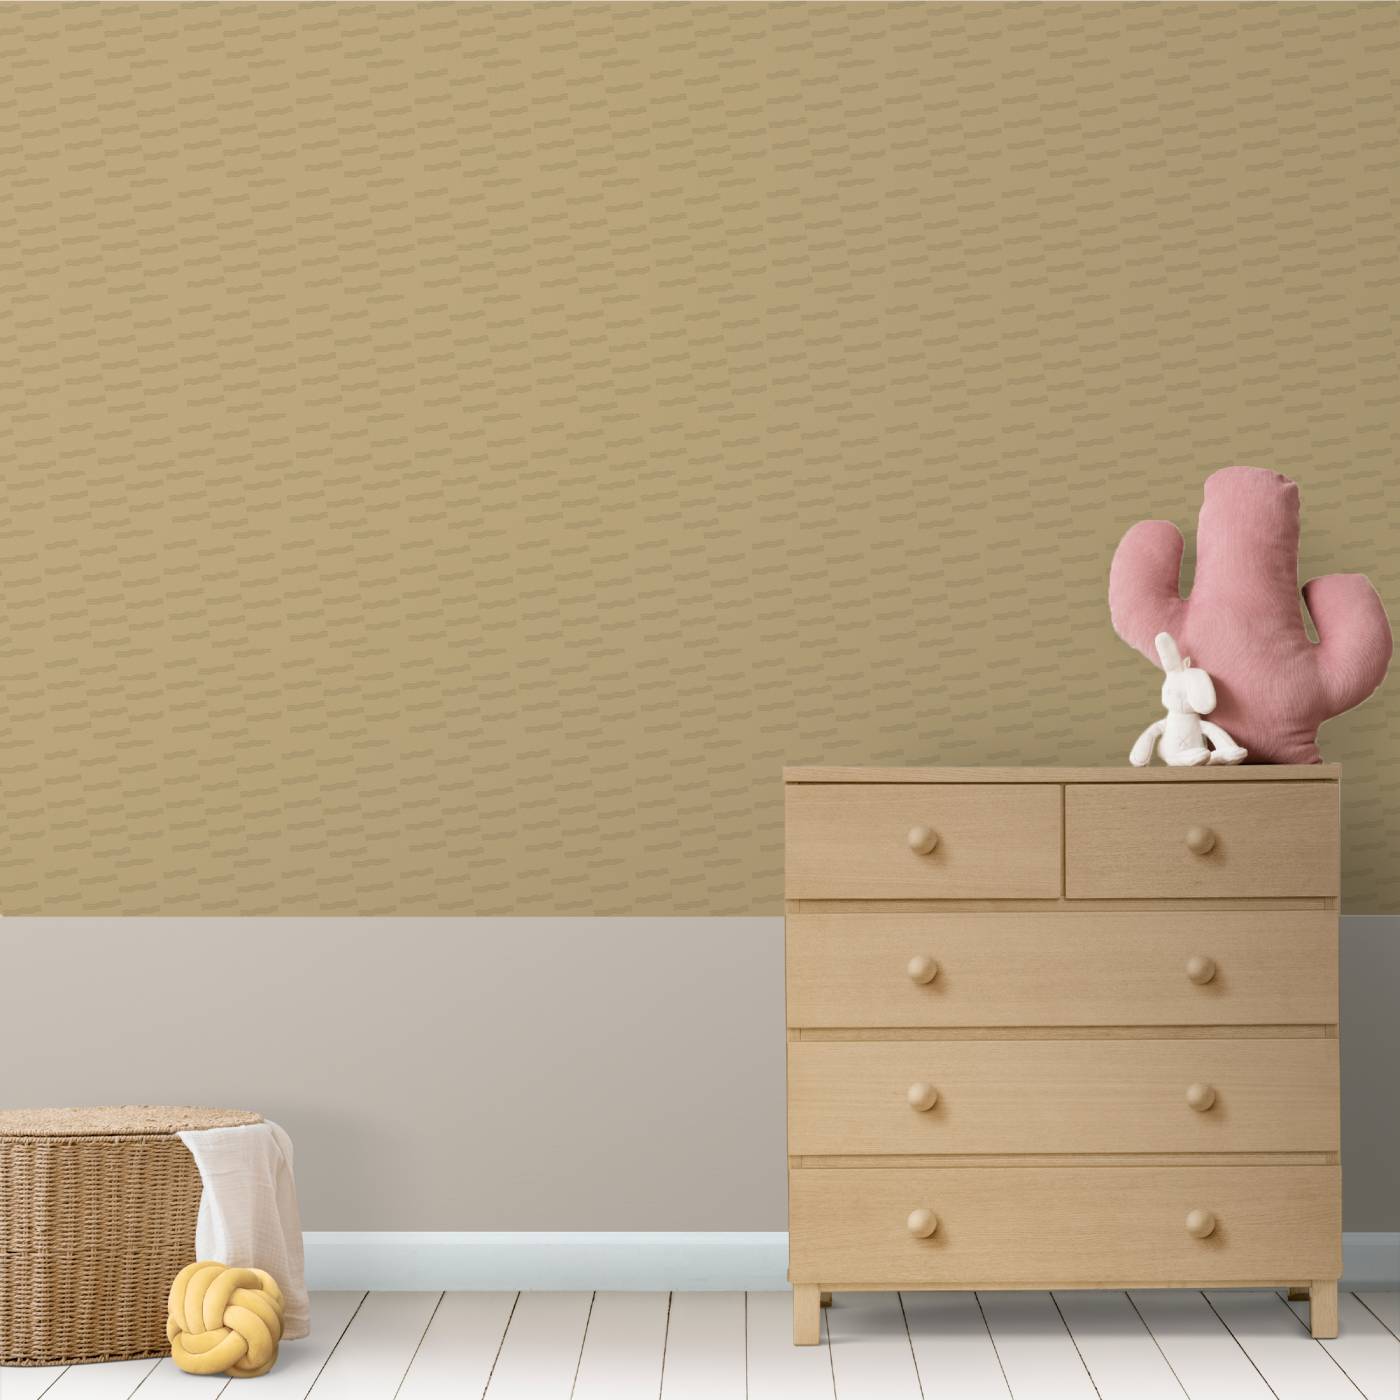 Seamless interior wall designs preview image.